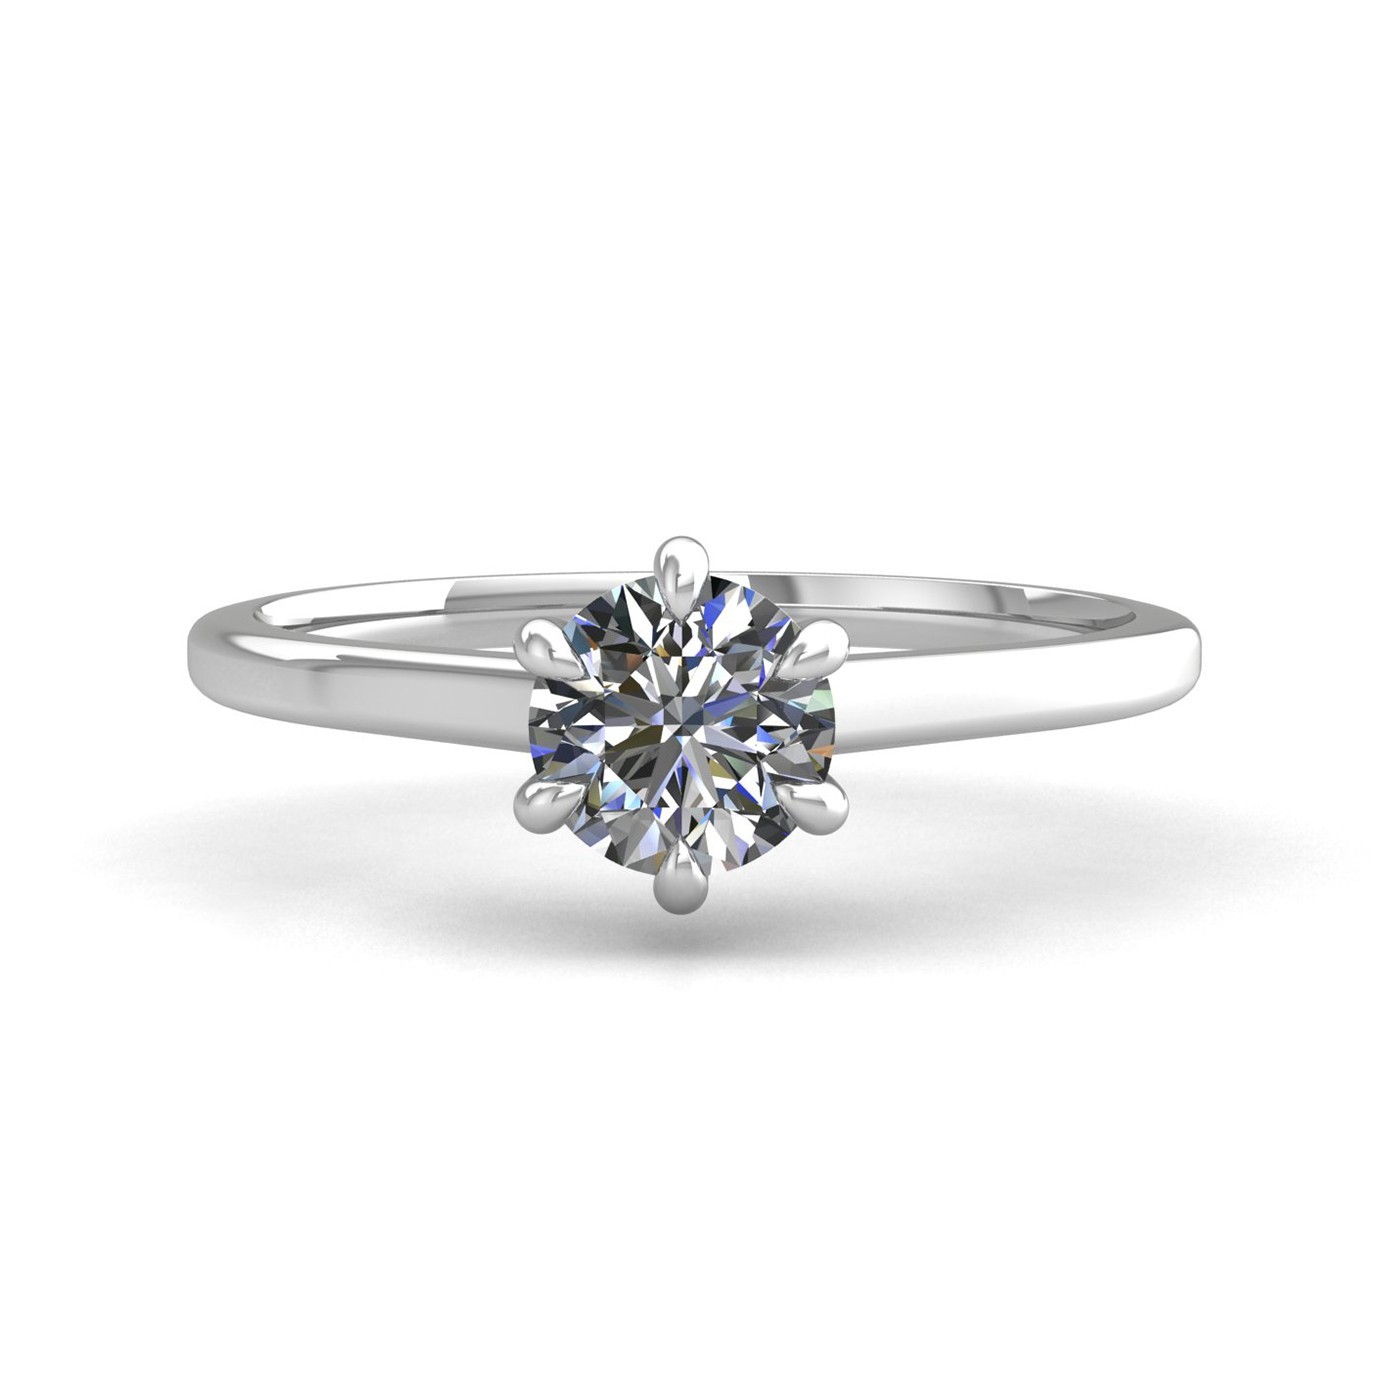 18k white gold 1,50 ct 6 prongs solitaire round cut diamond engagement ring with whisper thin band Photos & images